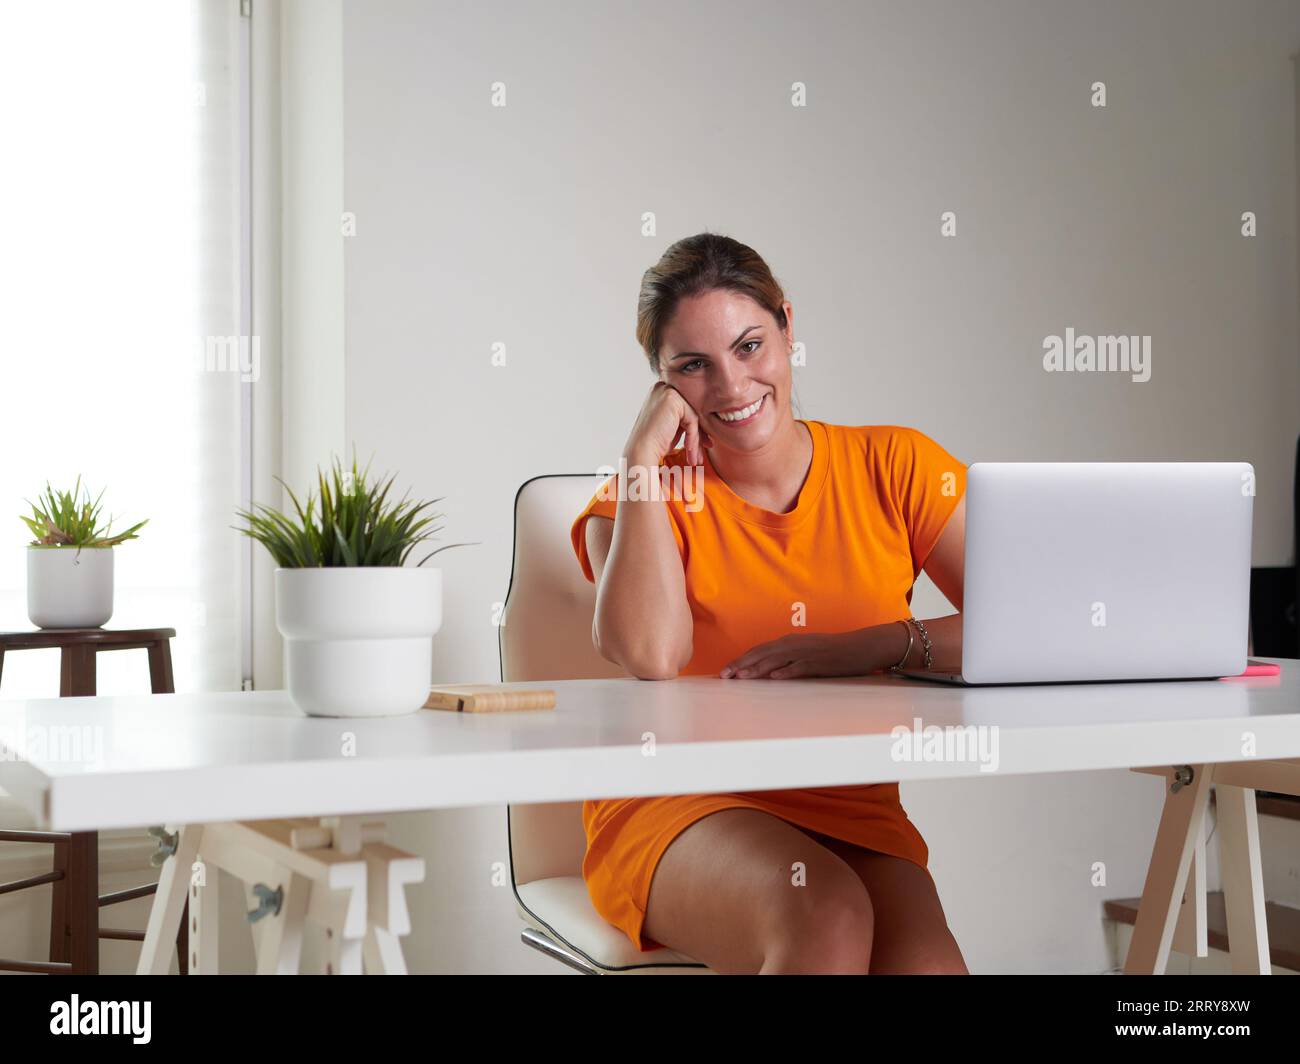 smiling woman working at home with laptop Stock Photo